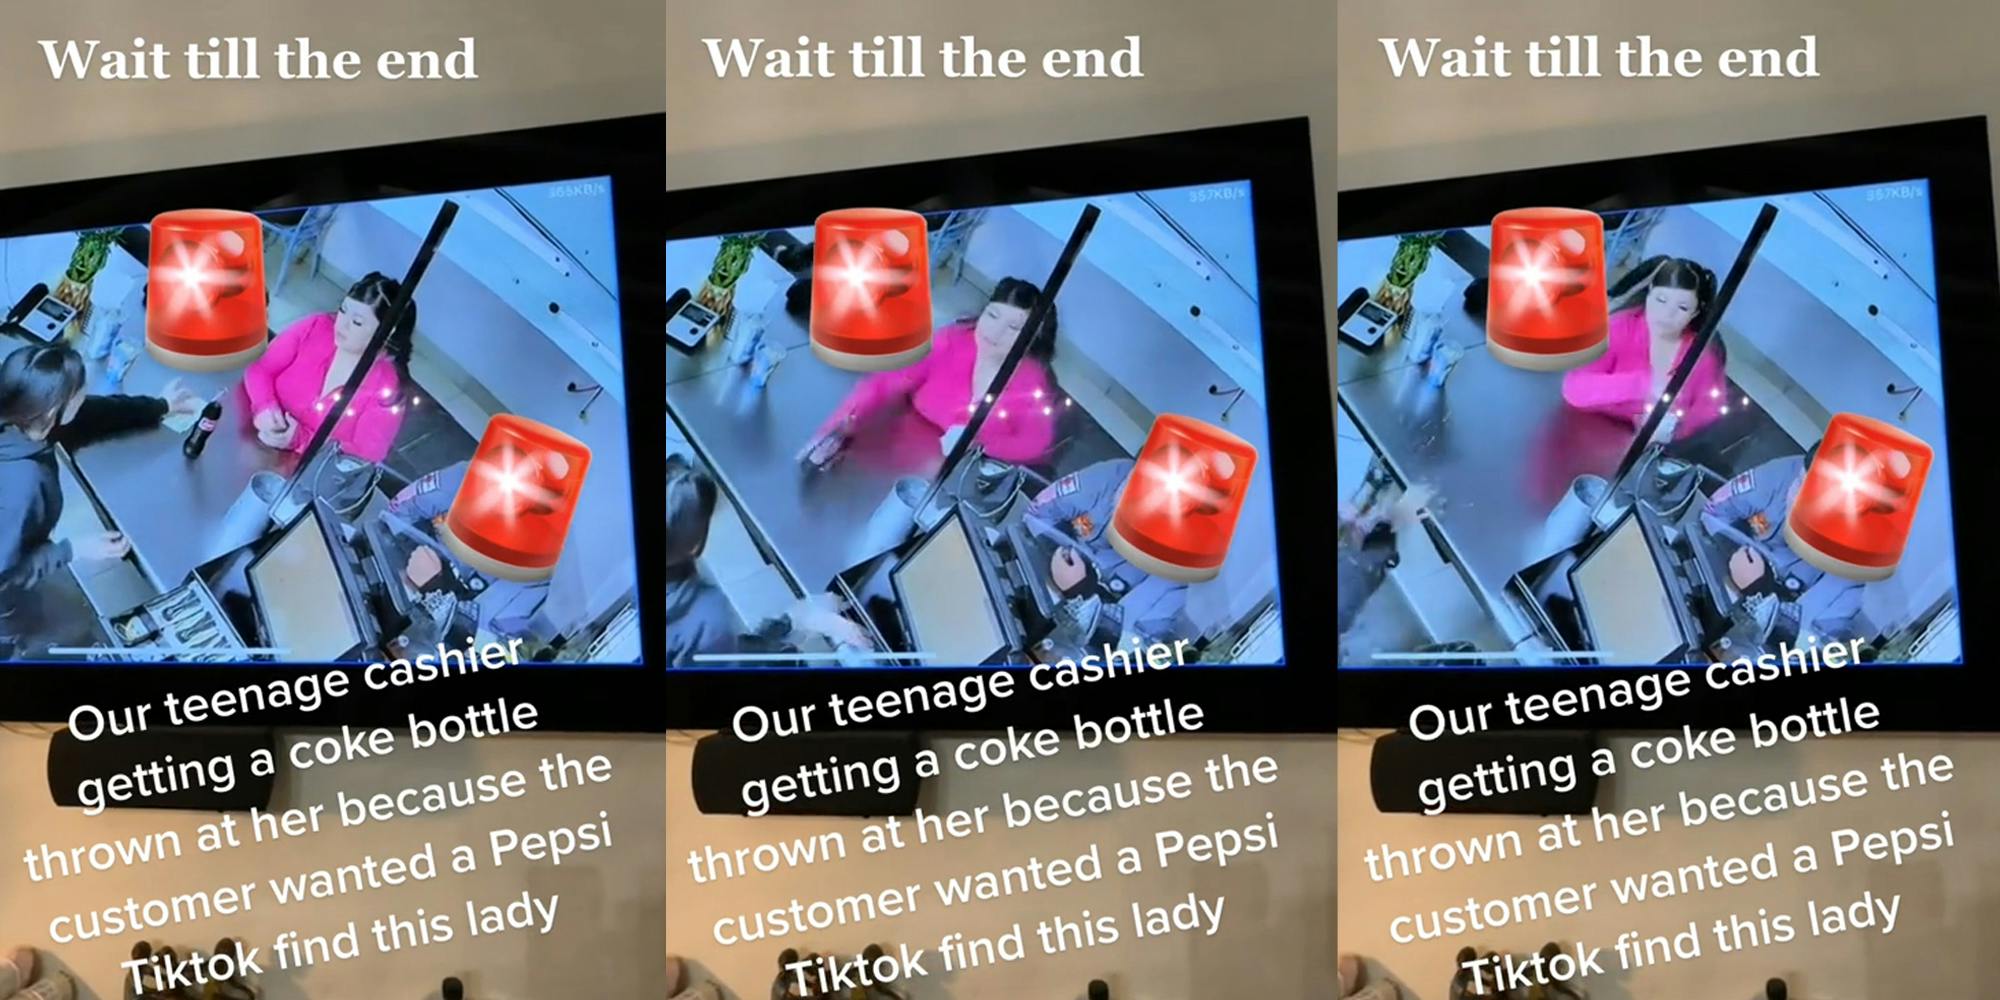 security camera footage playing on tv with woman and cashier interaction with caption "Wait till the end our teenage cashier getting a coke bottle thrown at her because the customer wanted Pepsi TikTok find this lady" (l) security camera footage playing on tv with woman pushing bottle of coke at cashier with caption "Wait till the end our teenage cashier getting a coke bottle thrown at her because the customer wanted Pepsi TikTok find this lady" (c) security camera footage playing on tv with woman hitting cashier with coke bottle with caption "Wait till the end our teenage cashier getting a coke bottle thrown at her because the customer wanted Pepsi TikTok find this lady" (r)